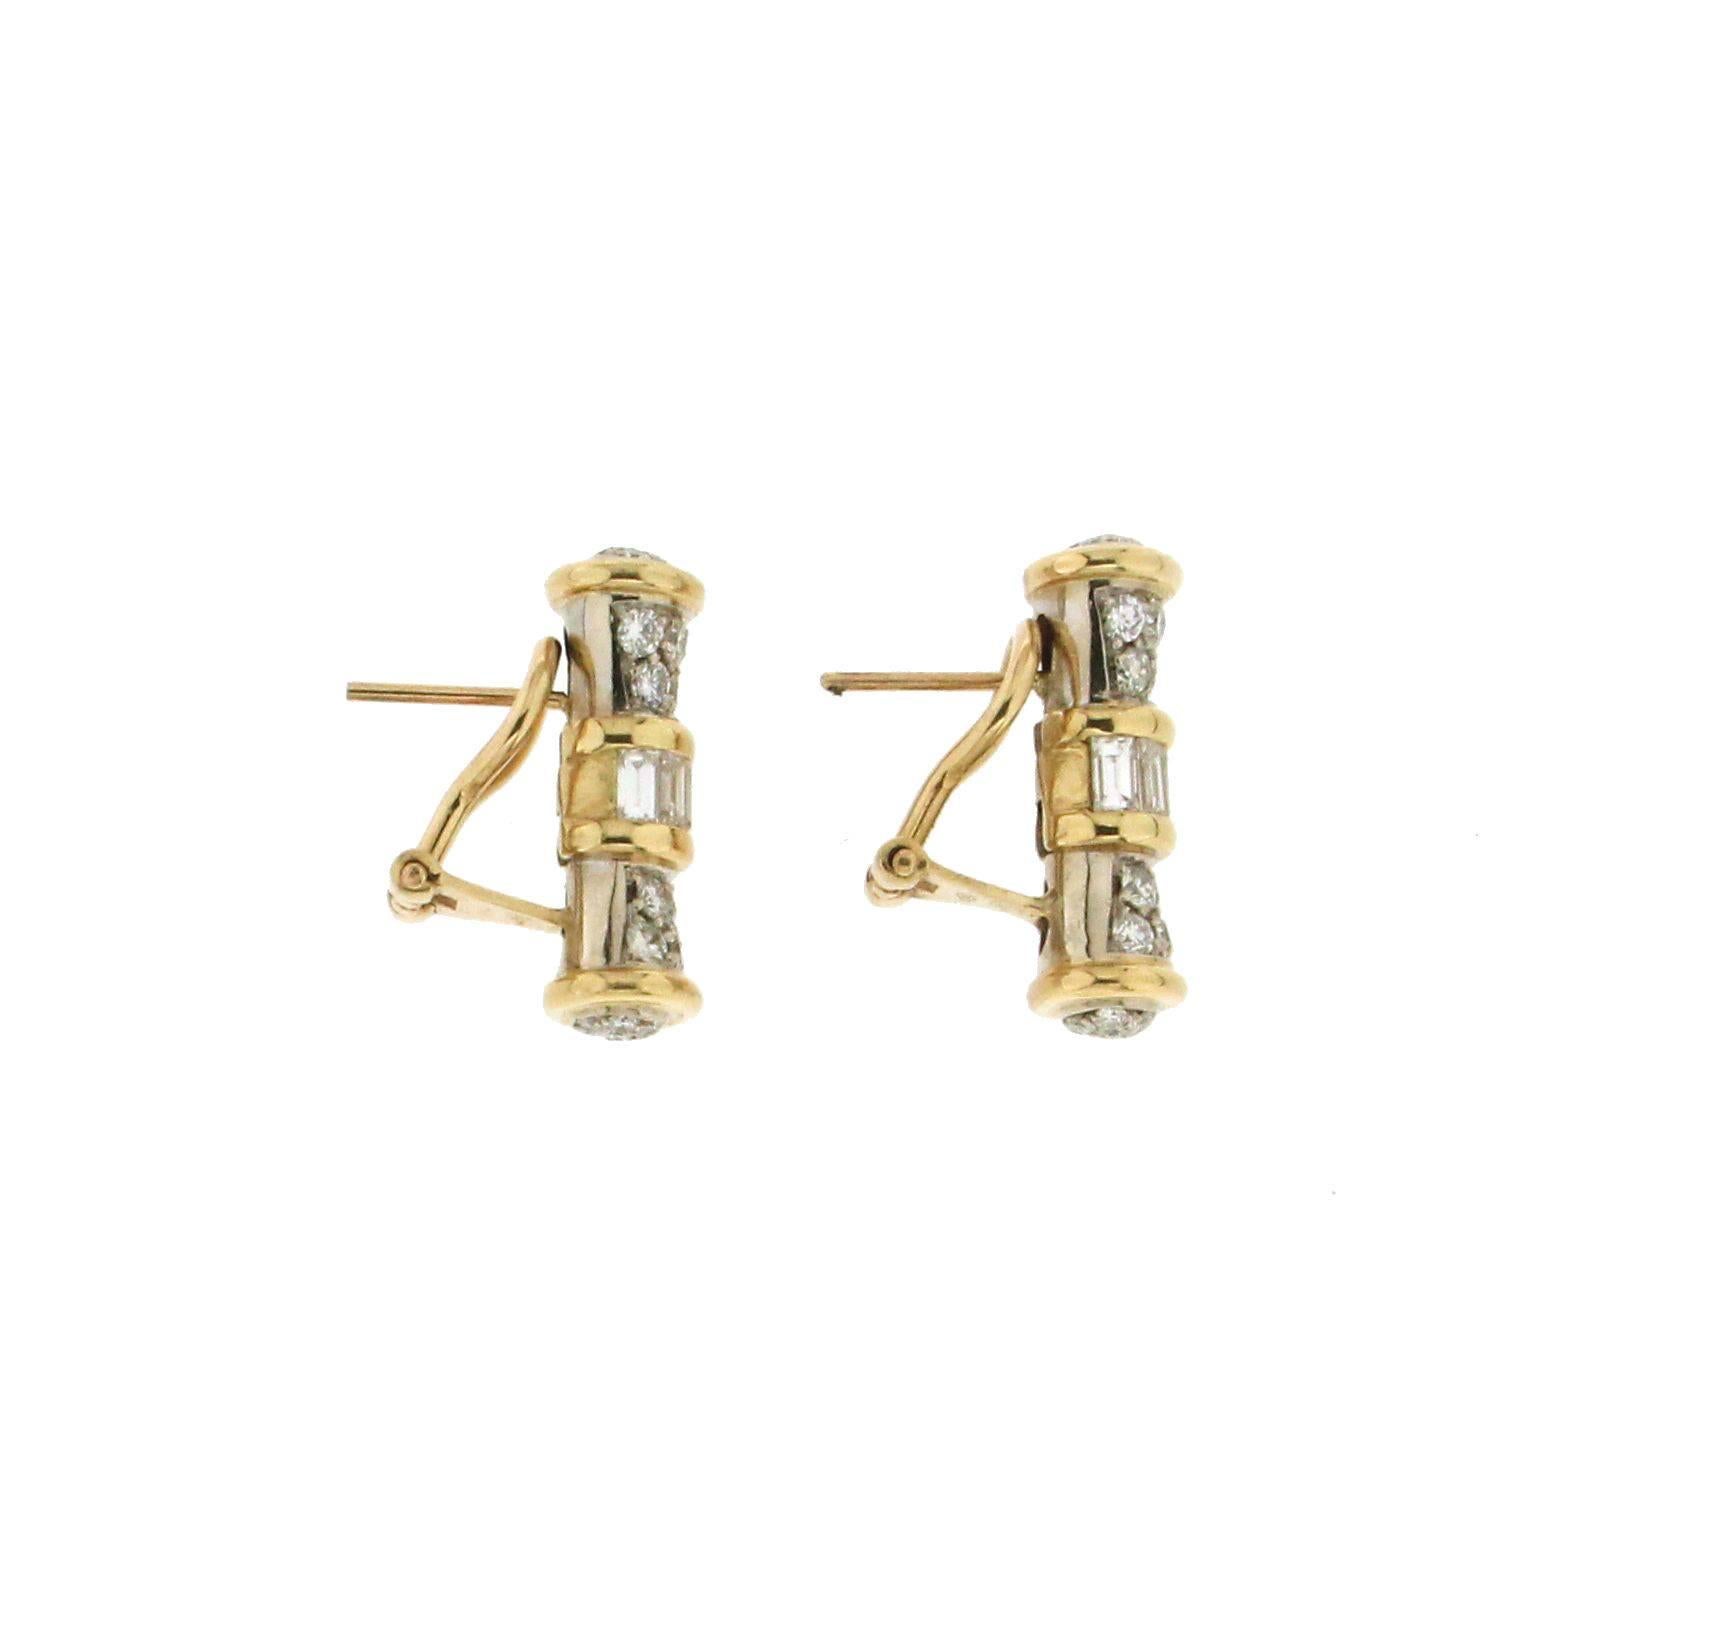 Handcraft 18 Karat White and Yellow Gold Diamonds Clip-On Earrings For ...